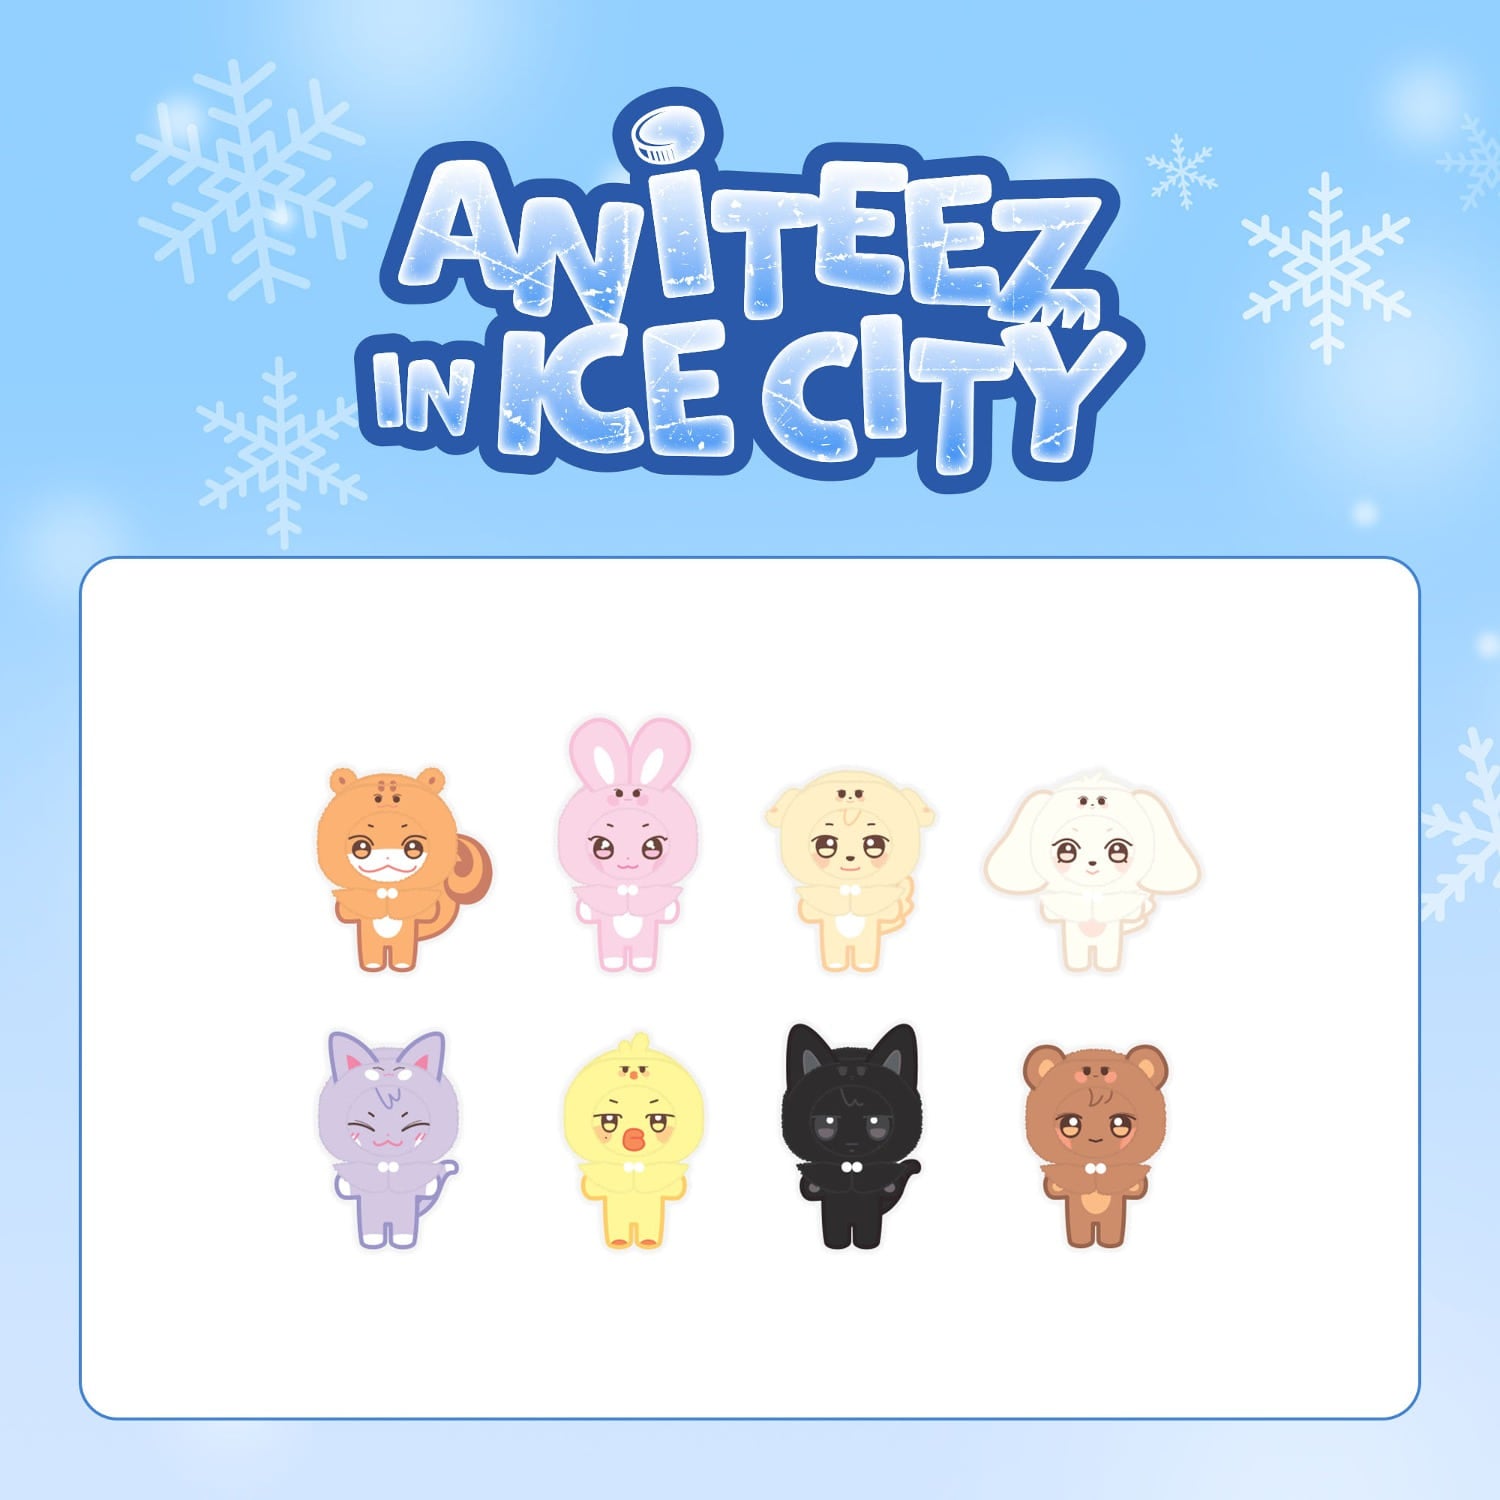 ATEEZ - ATEEZ X ANITEEZ IN ICE CITY OFFICIAL MD PLUSH DOLL COVER A VER.